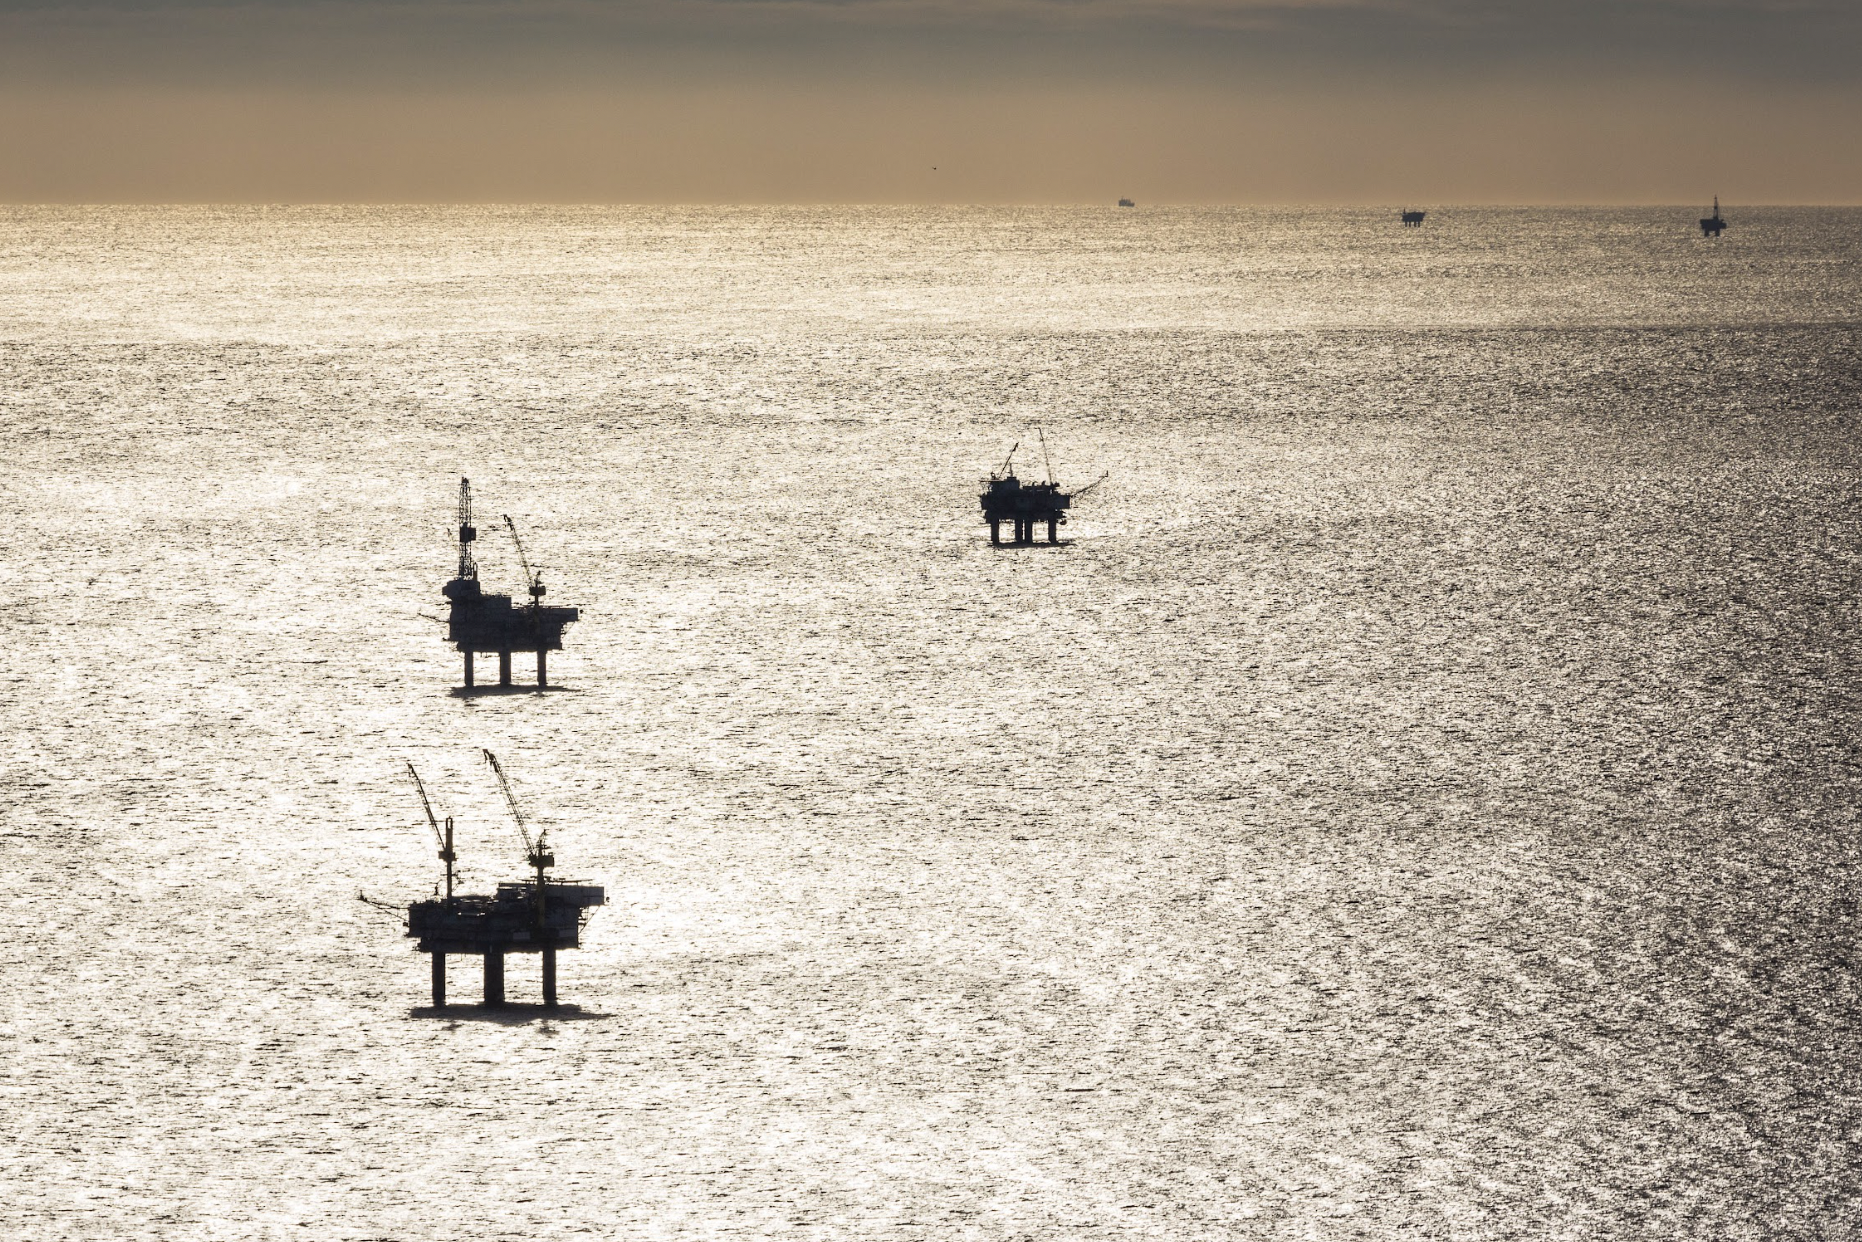 oil and gas platforms in the water